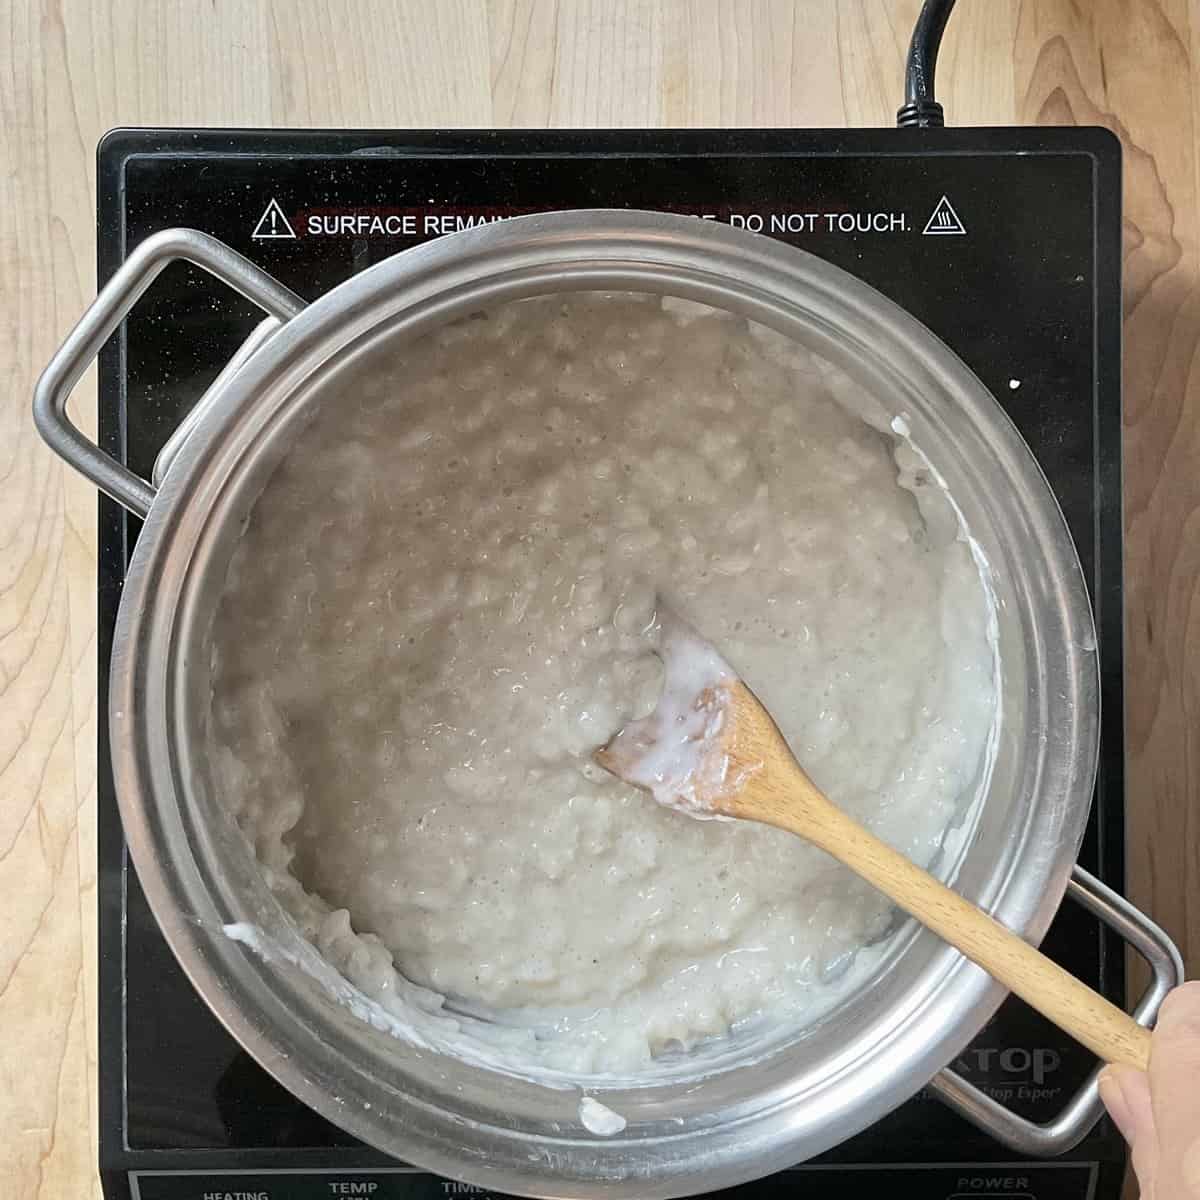 Rice pudding being stirred in a pot.